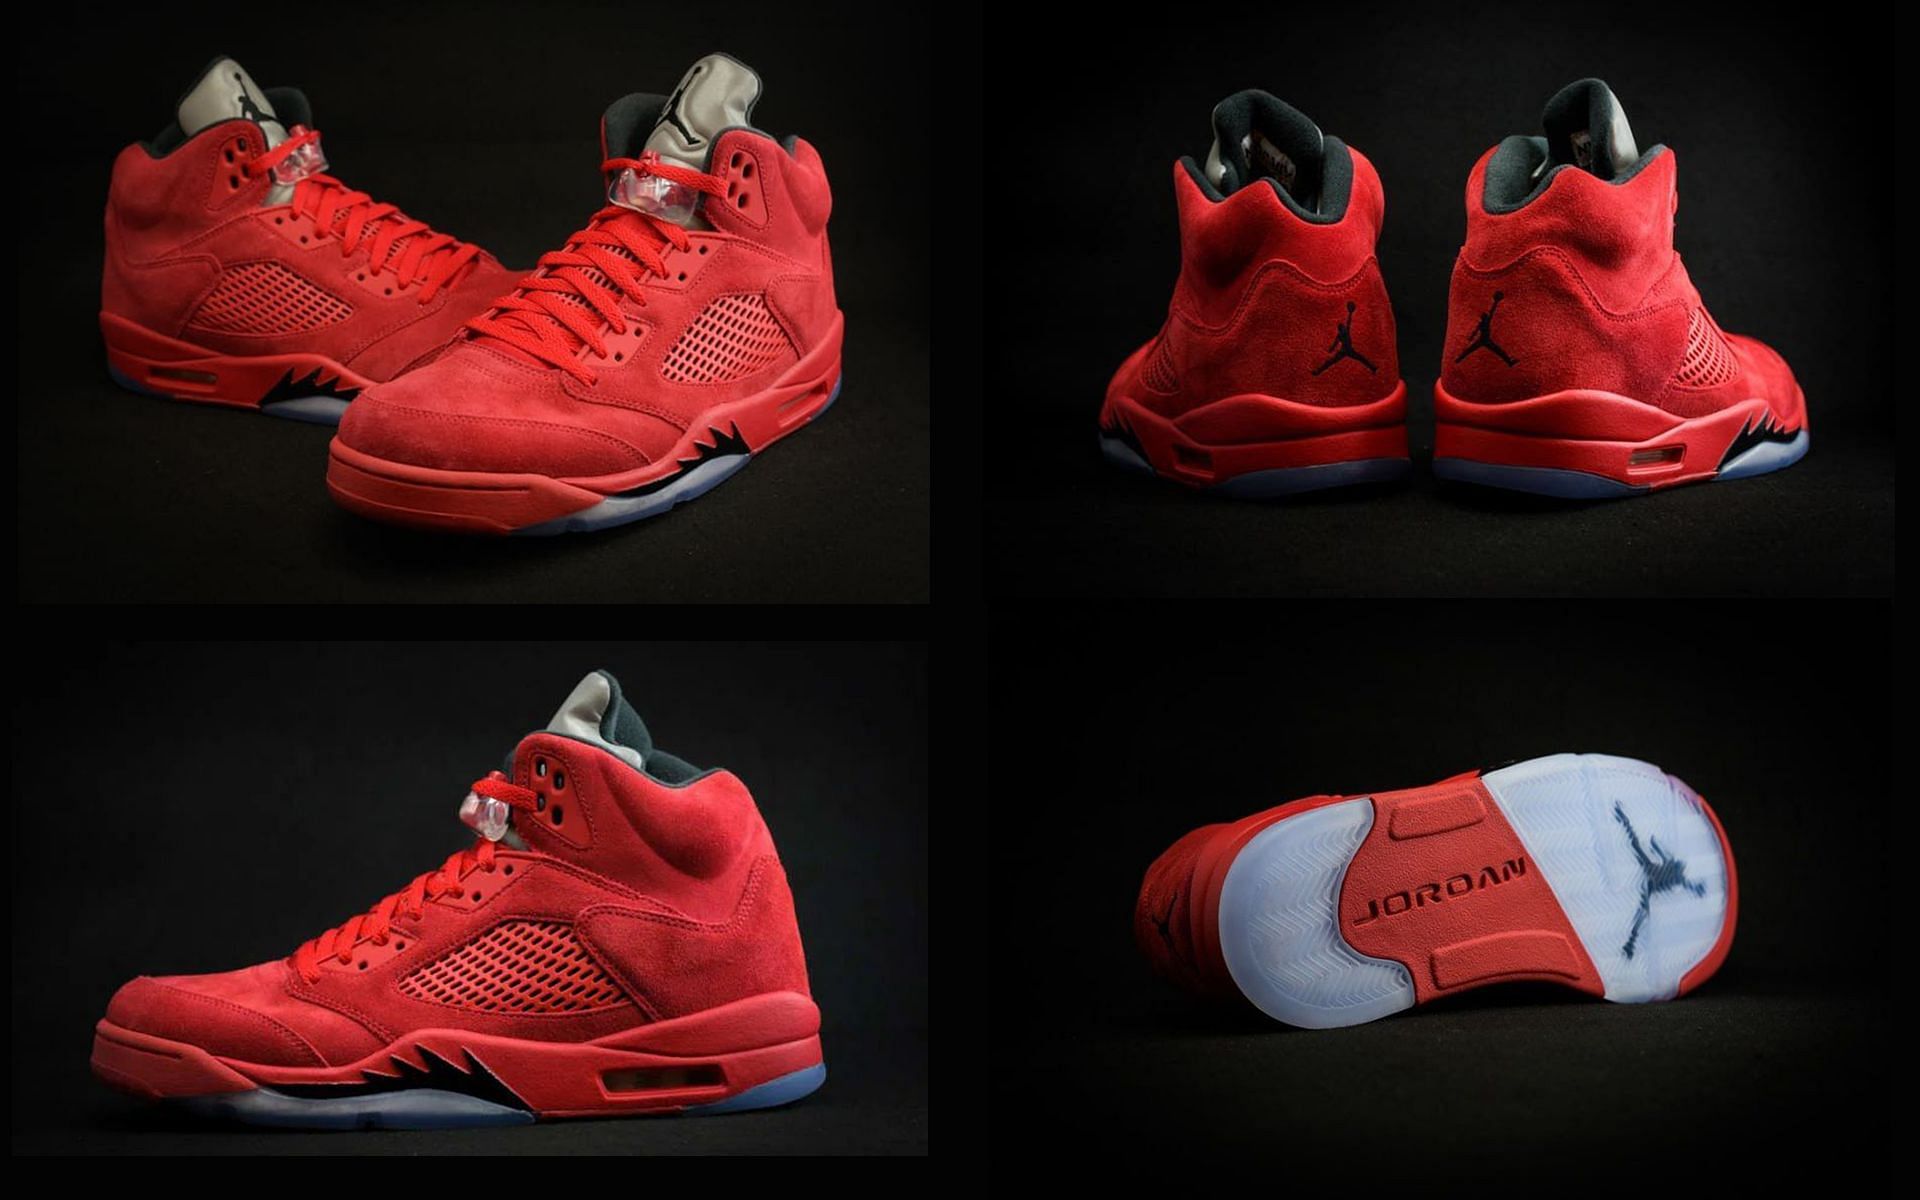 Take a closer look at the AJ5 Red suede shoes (Image via Sportskeeda)